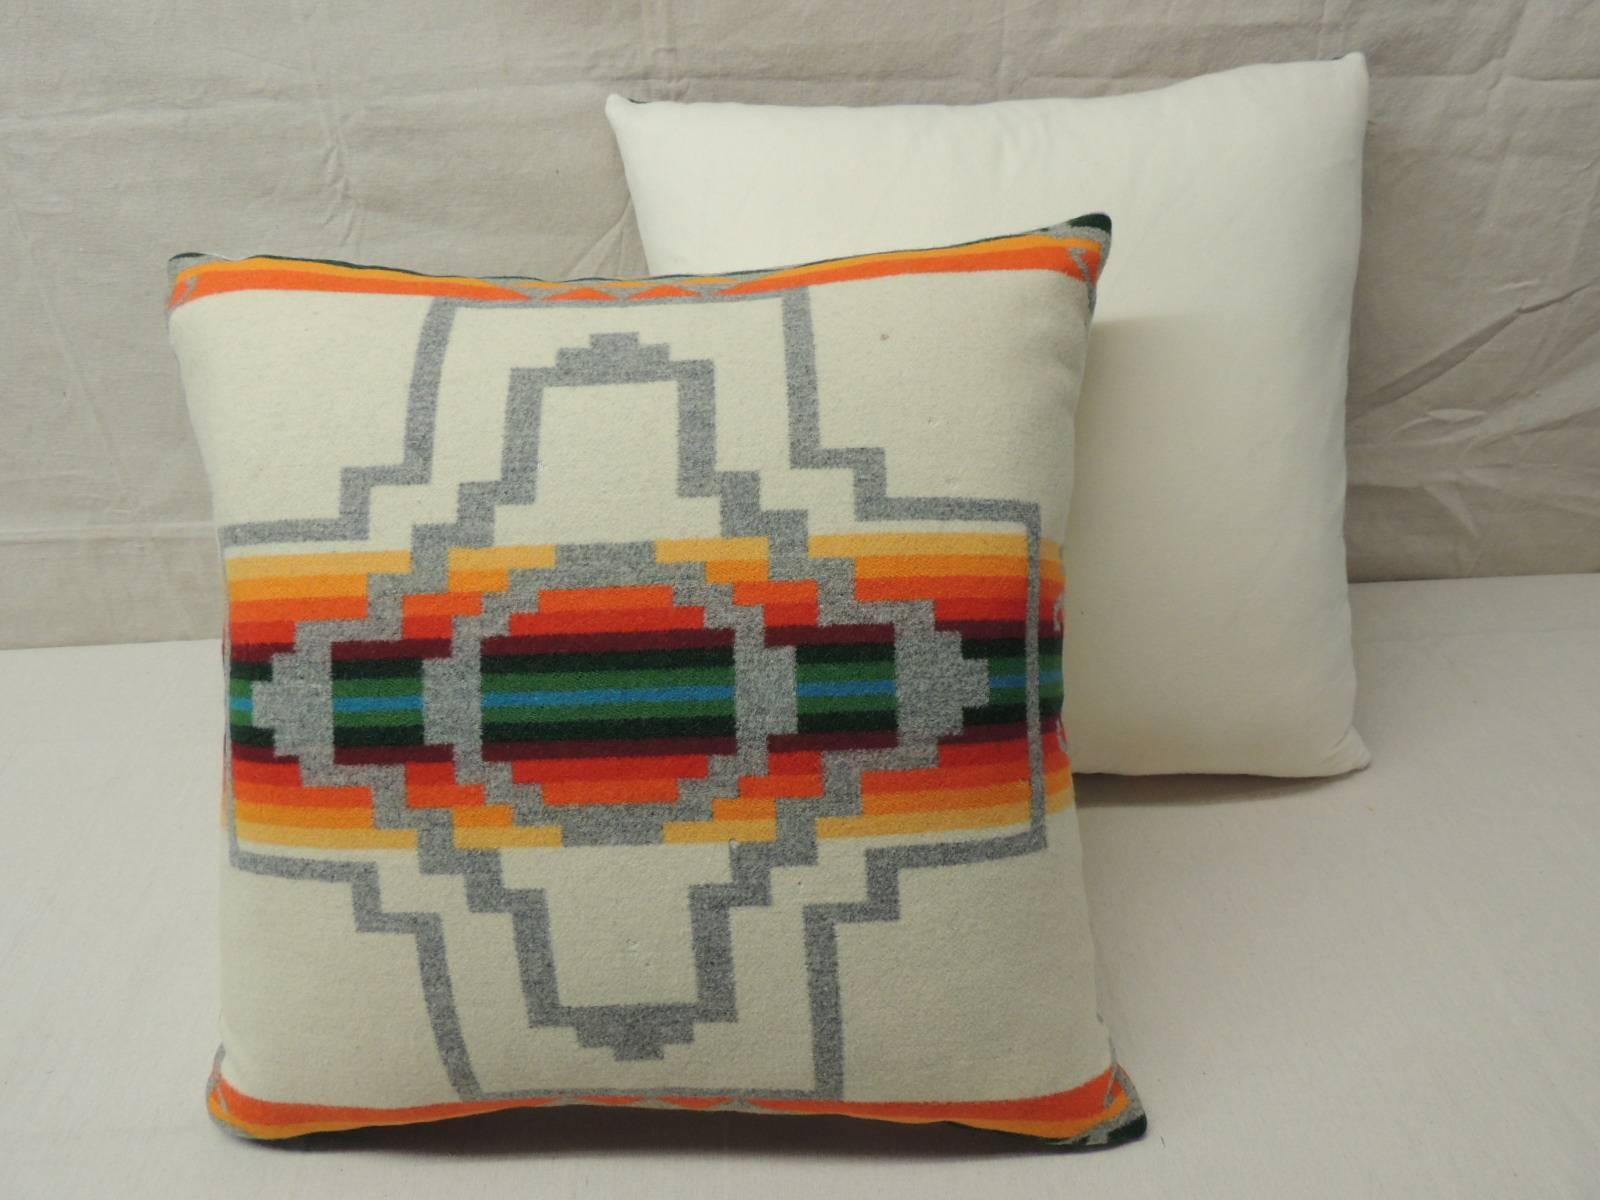 North American Pair of American Indian Pattern Blanket Pillows in Natural